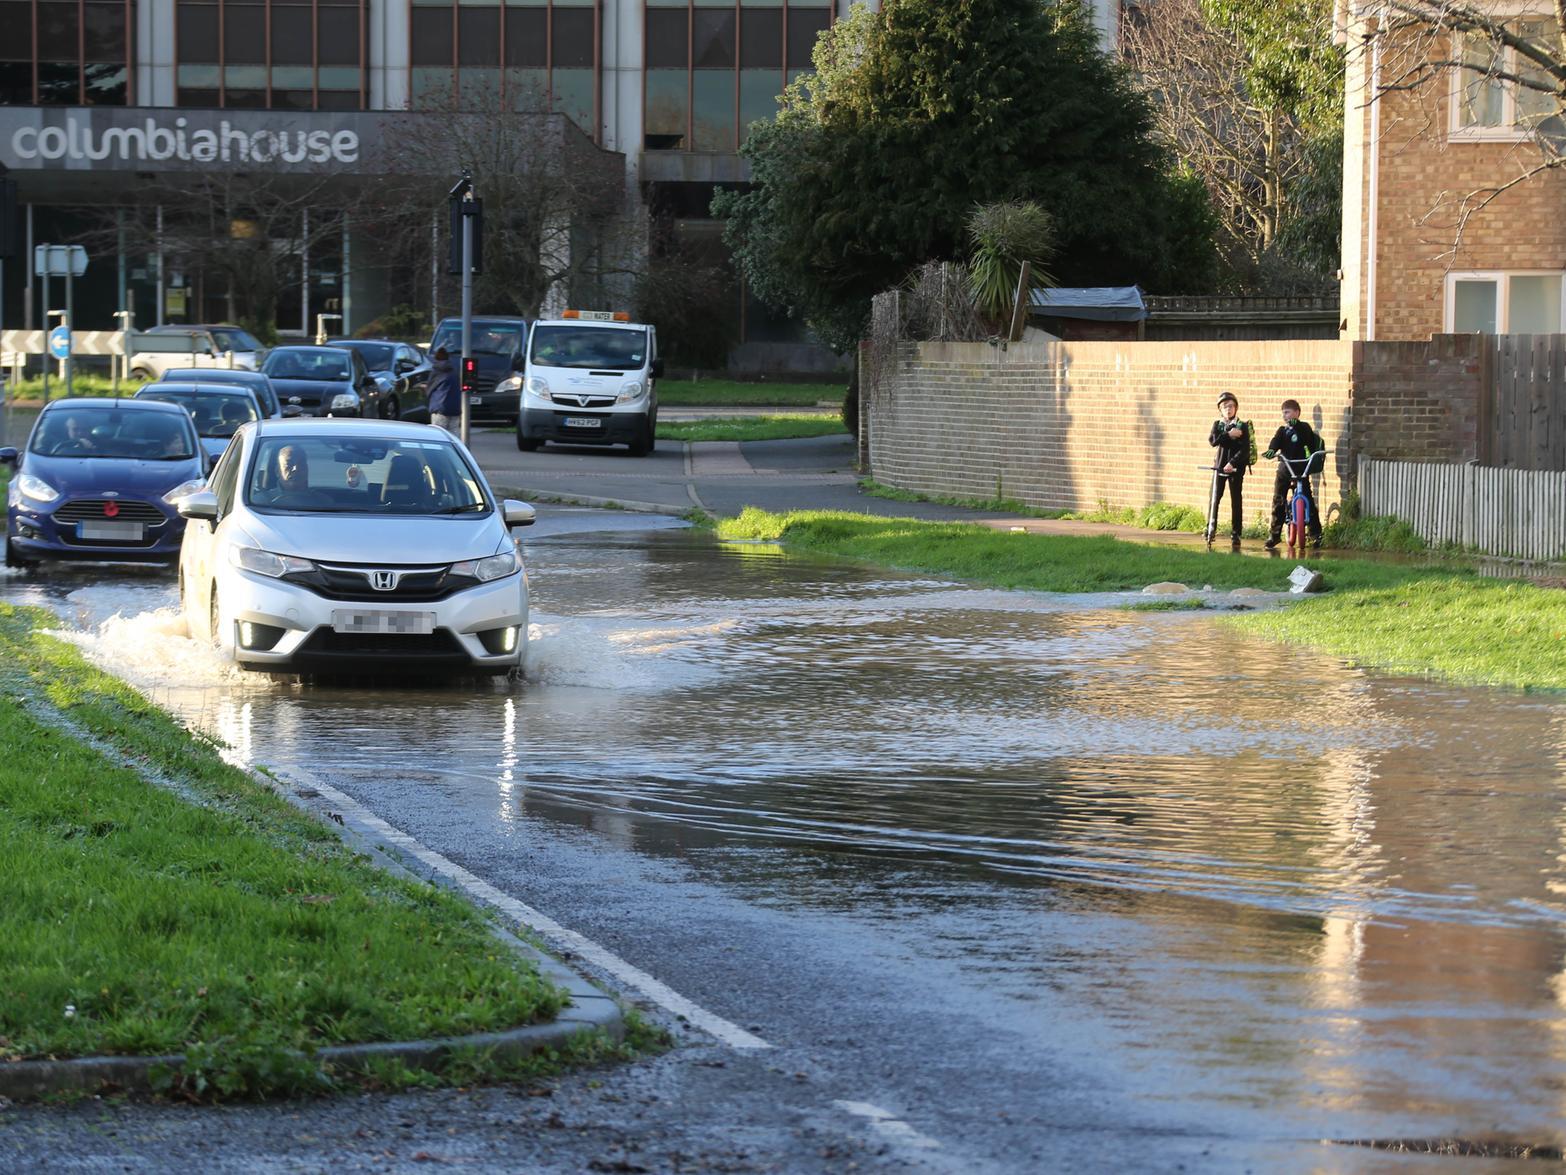 The scene of the flooding in Columbia Drive, Worthing